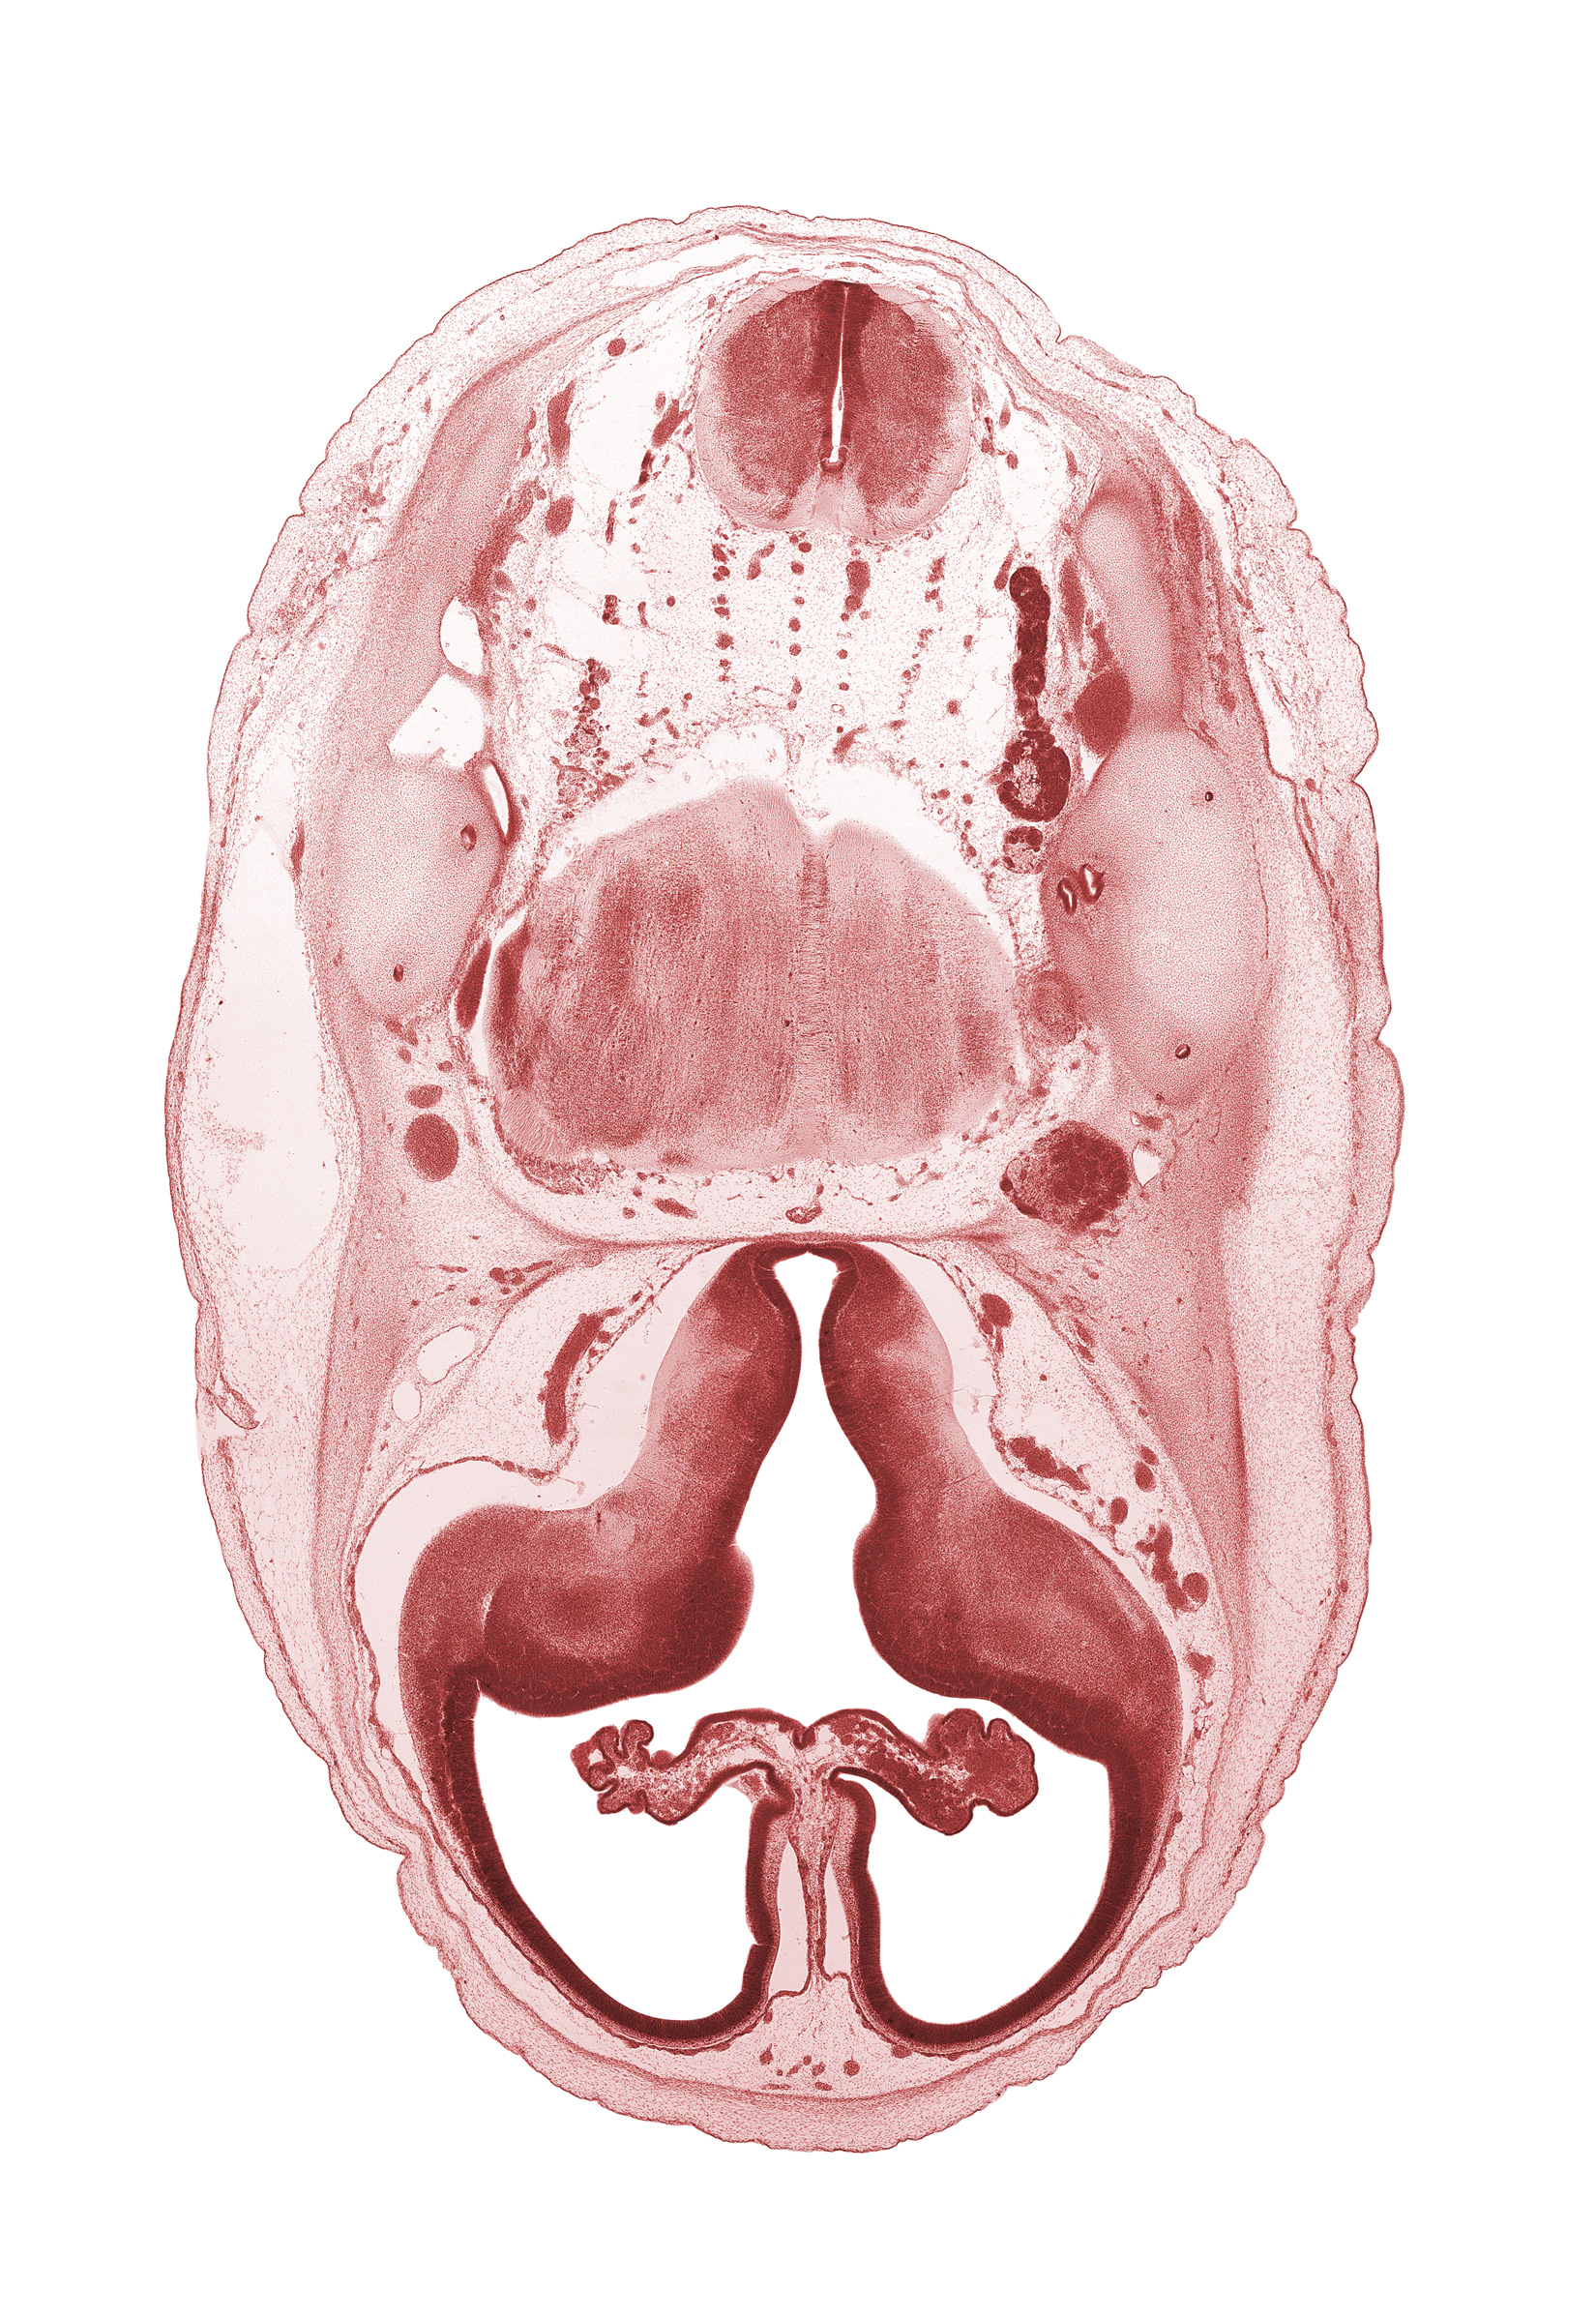 anterior semicircular duct, artifact separation(s), basilar artery, choroid plexus, edge of lateral recess of rhombencoel (fourth ventricle), fasciculus cuneatus, fasciculus gracilis, hypothalamic sulcus, hypothalamus, internal carotid artery, internal jugular vein, junction of internal carotid and posterior communicating arteries, lateral ventricular eminence (telencephalon), medial ventricular eminence (diencephalon), motor root of trigeminal nerve (CN V), otic capsule cartilage, pyramidal tract region, root of hypoglossal nerve (CN XII), trigeminal ganglion (CN V)